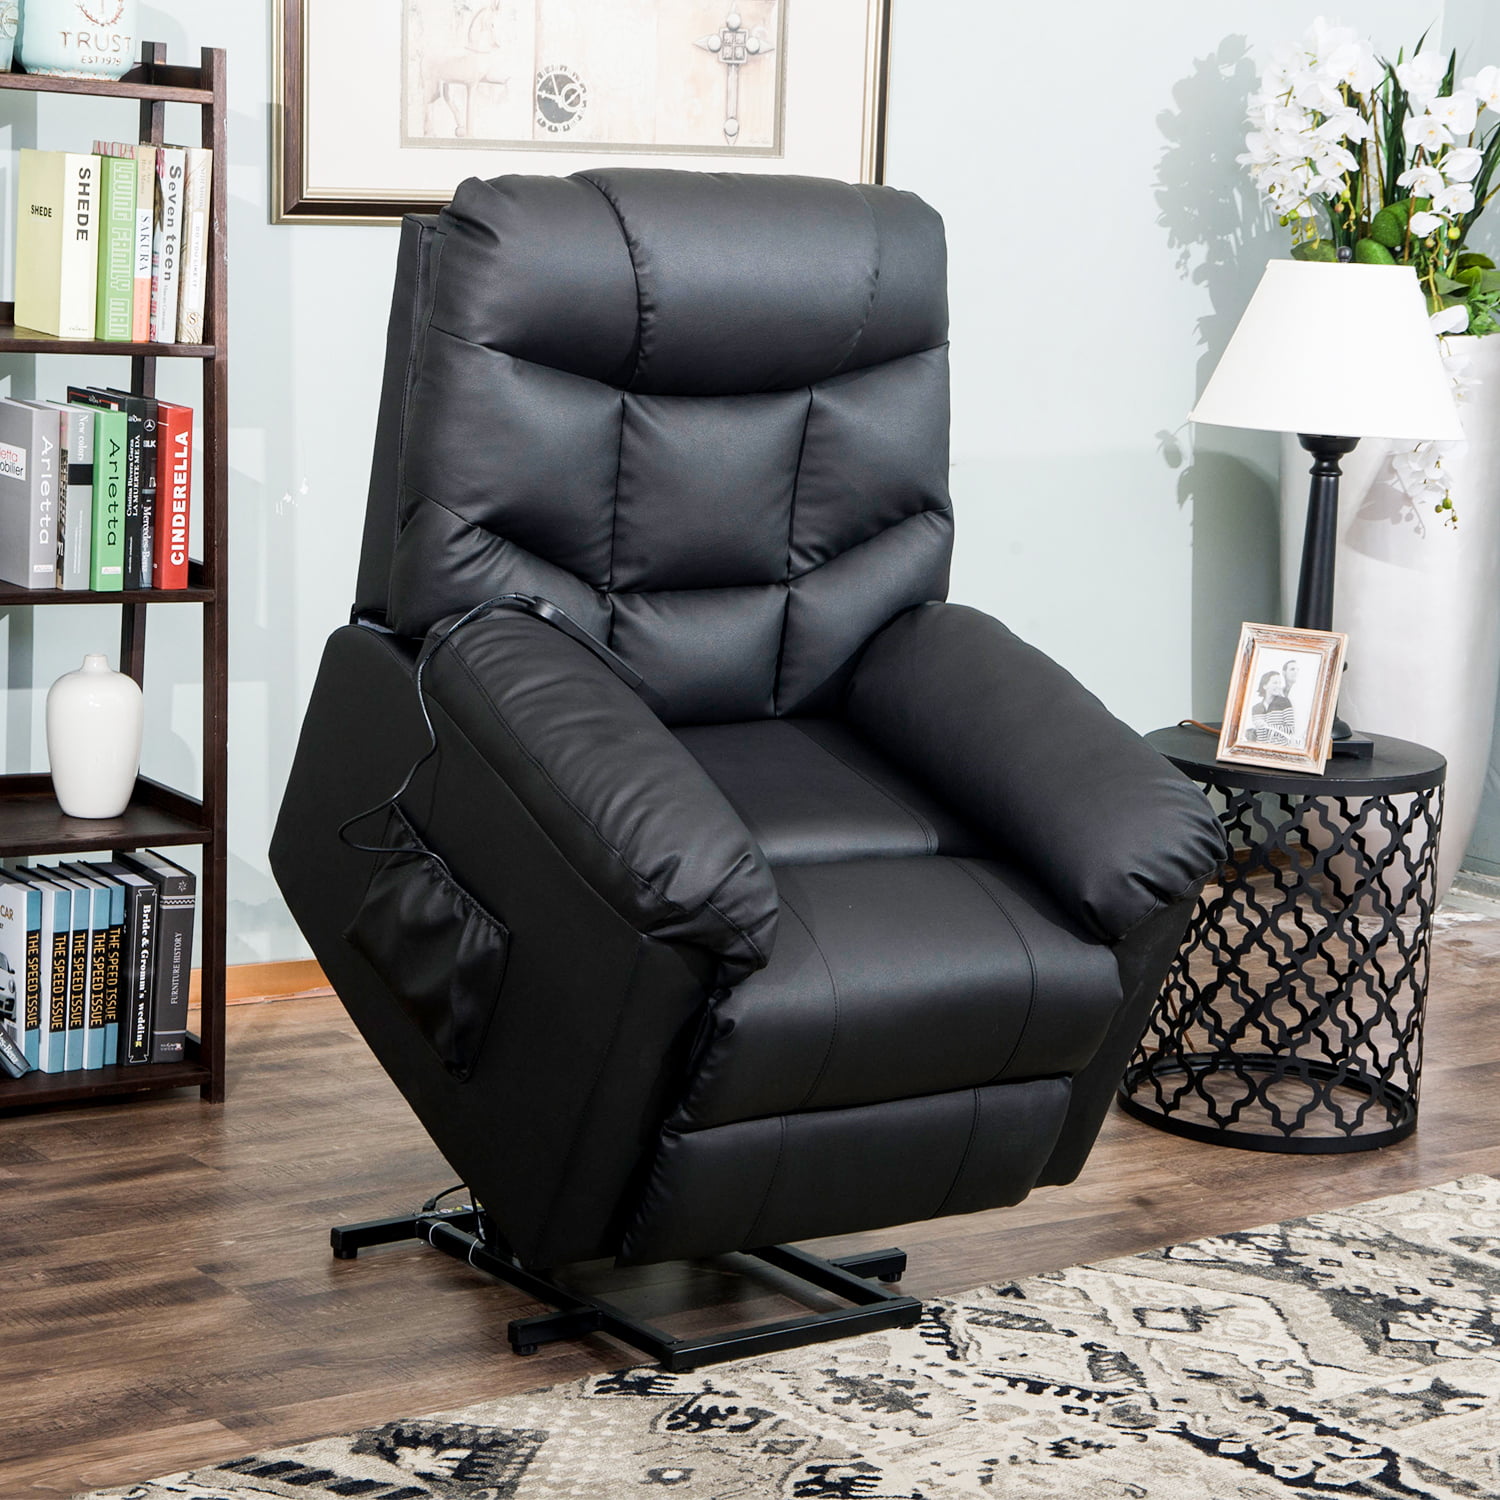 clearance recliner chair with remote control for lounge pu leather  ergonomic power lift recliner chair with padded seat backrest for home  theater